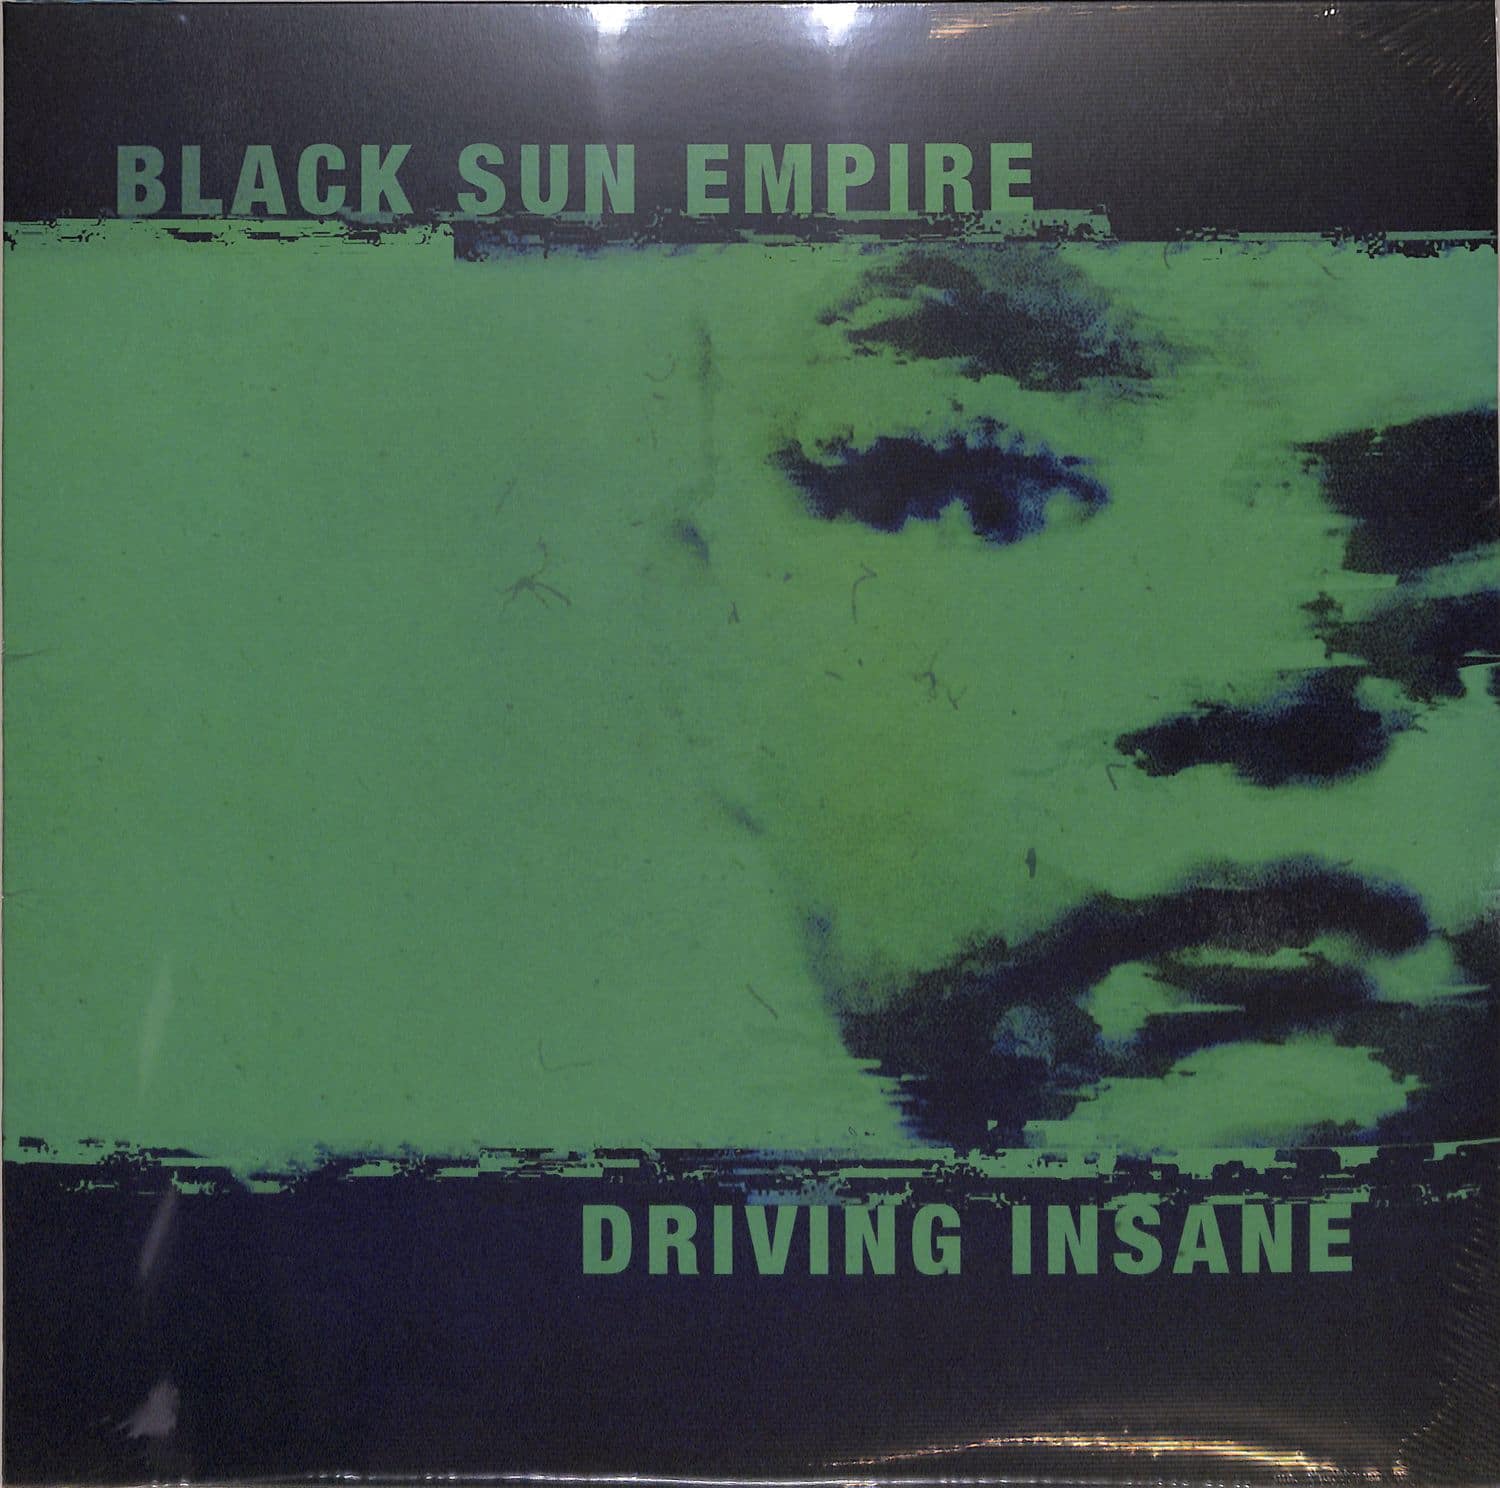 Black Sun Empire - DRIVING INSANE - 20 YEARS SPECIAL EDITION 